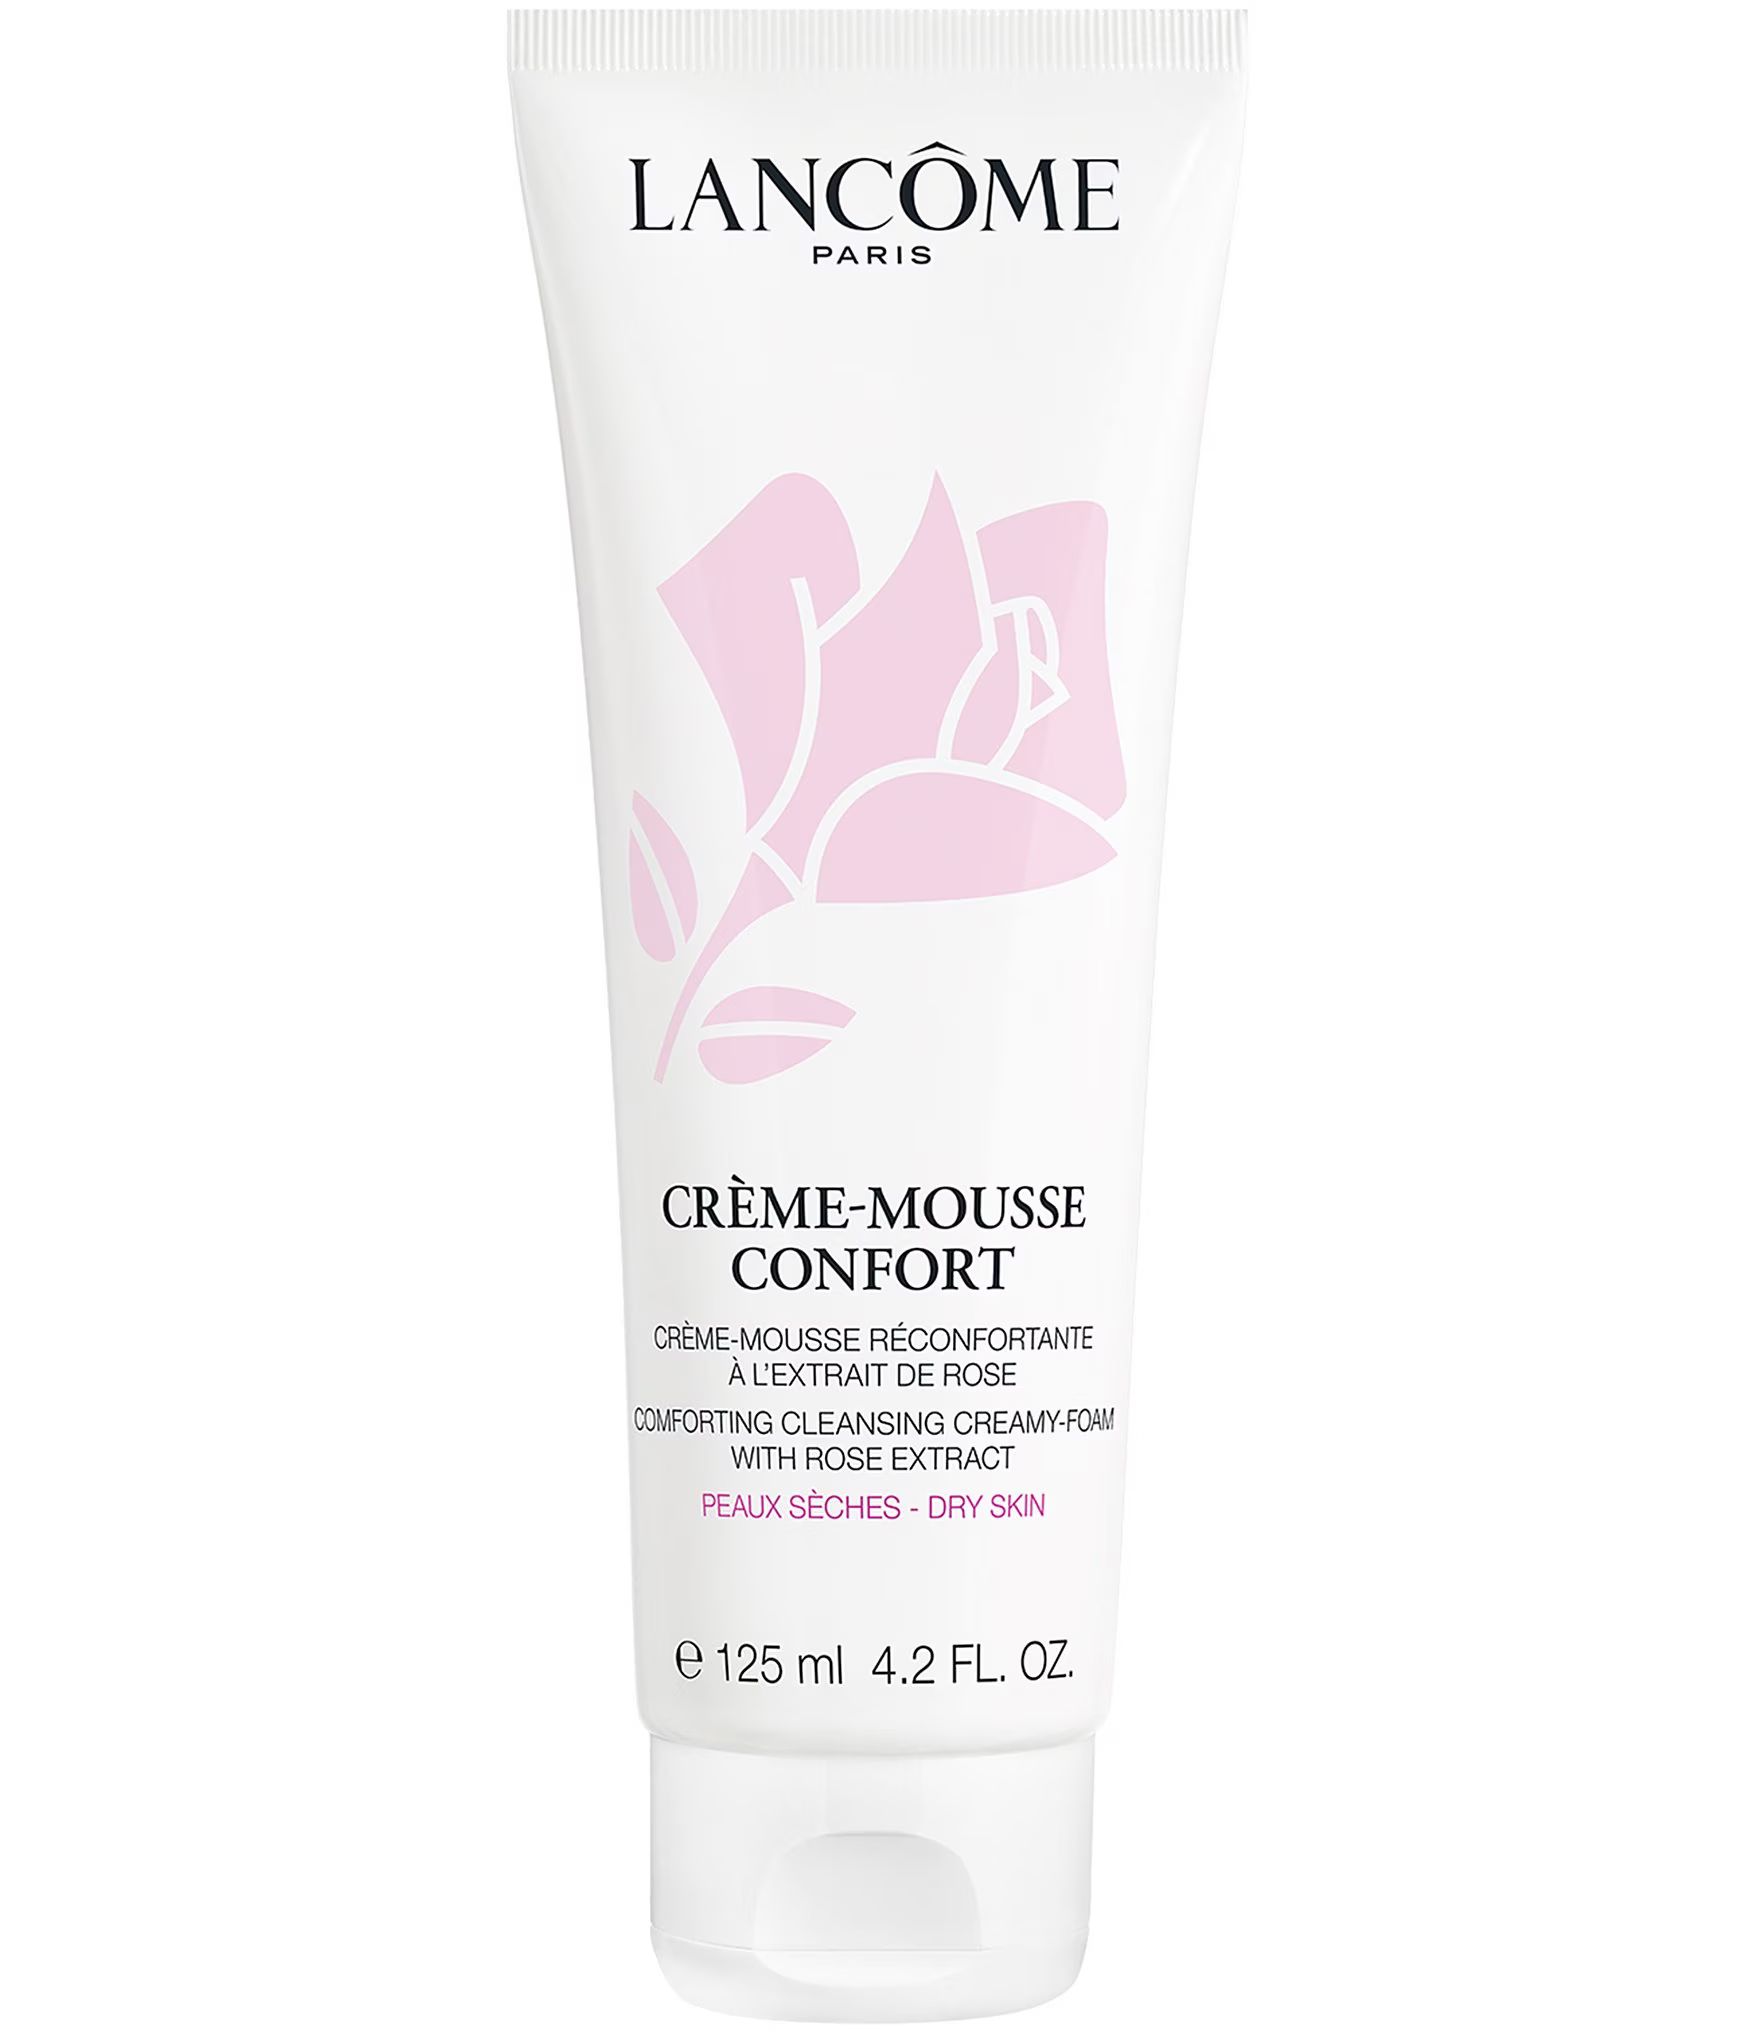 Lancome Creme Mousse Confort Comforting Creamy Foaming Cleanser | Dillards Inc.